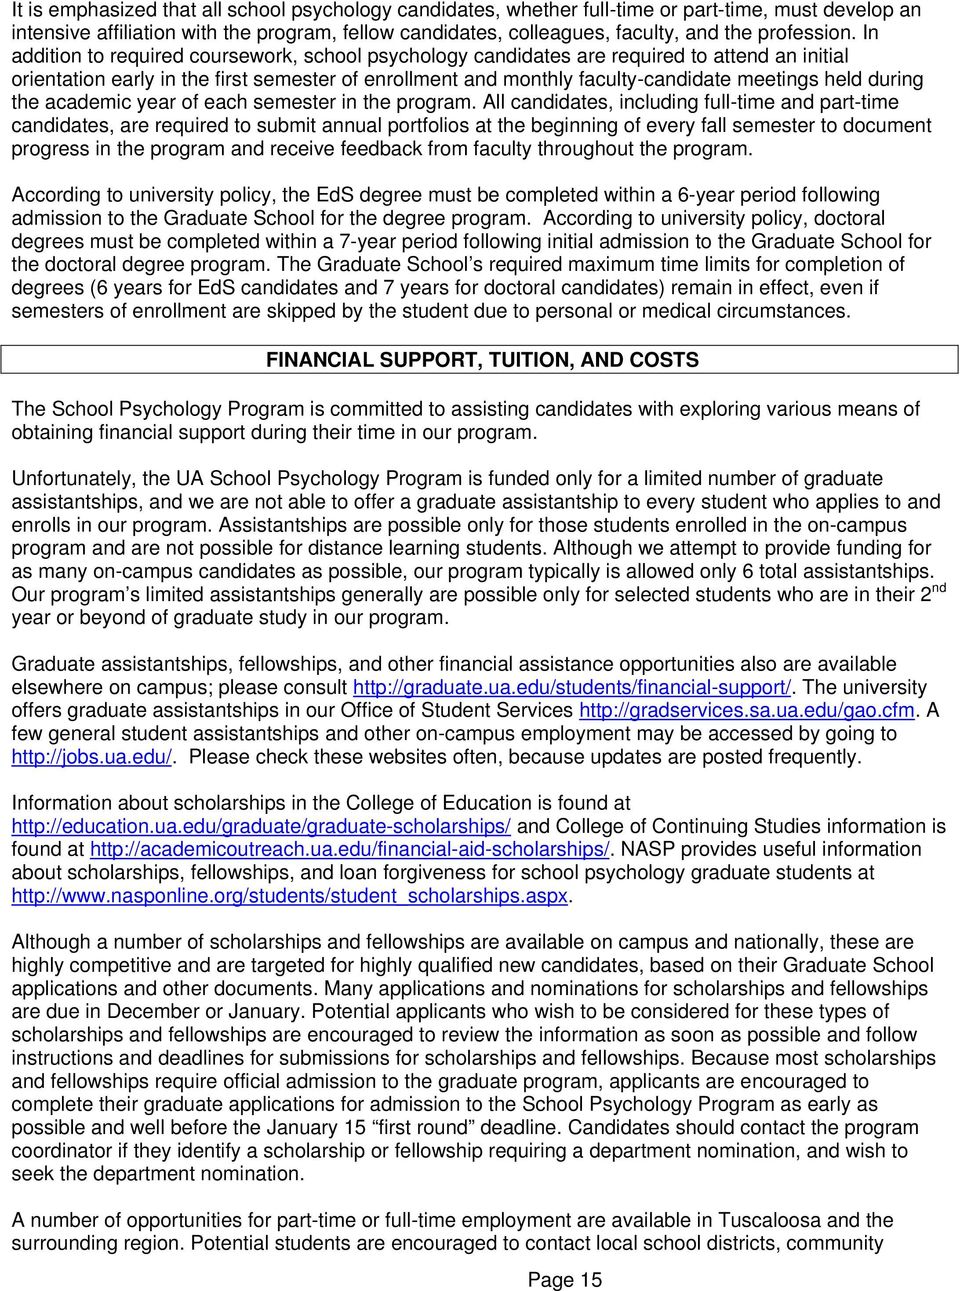 In addition to required coursework, school psychology candidates are required to attend an initial orientation early in the first semester of enrollment and monthly faculty-candidate meetings held